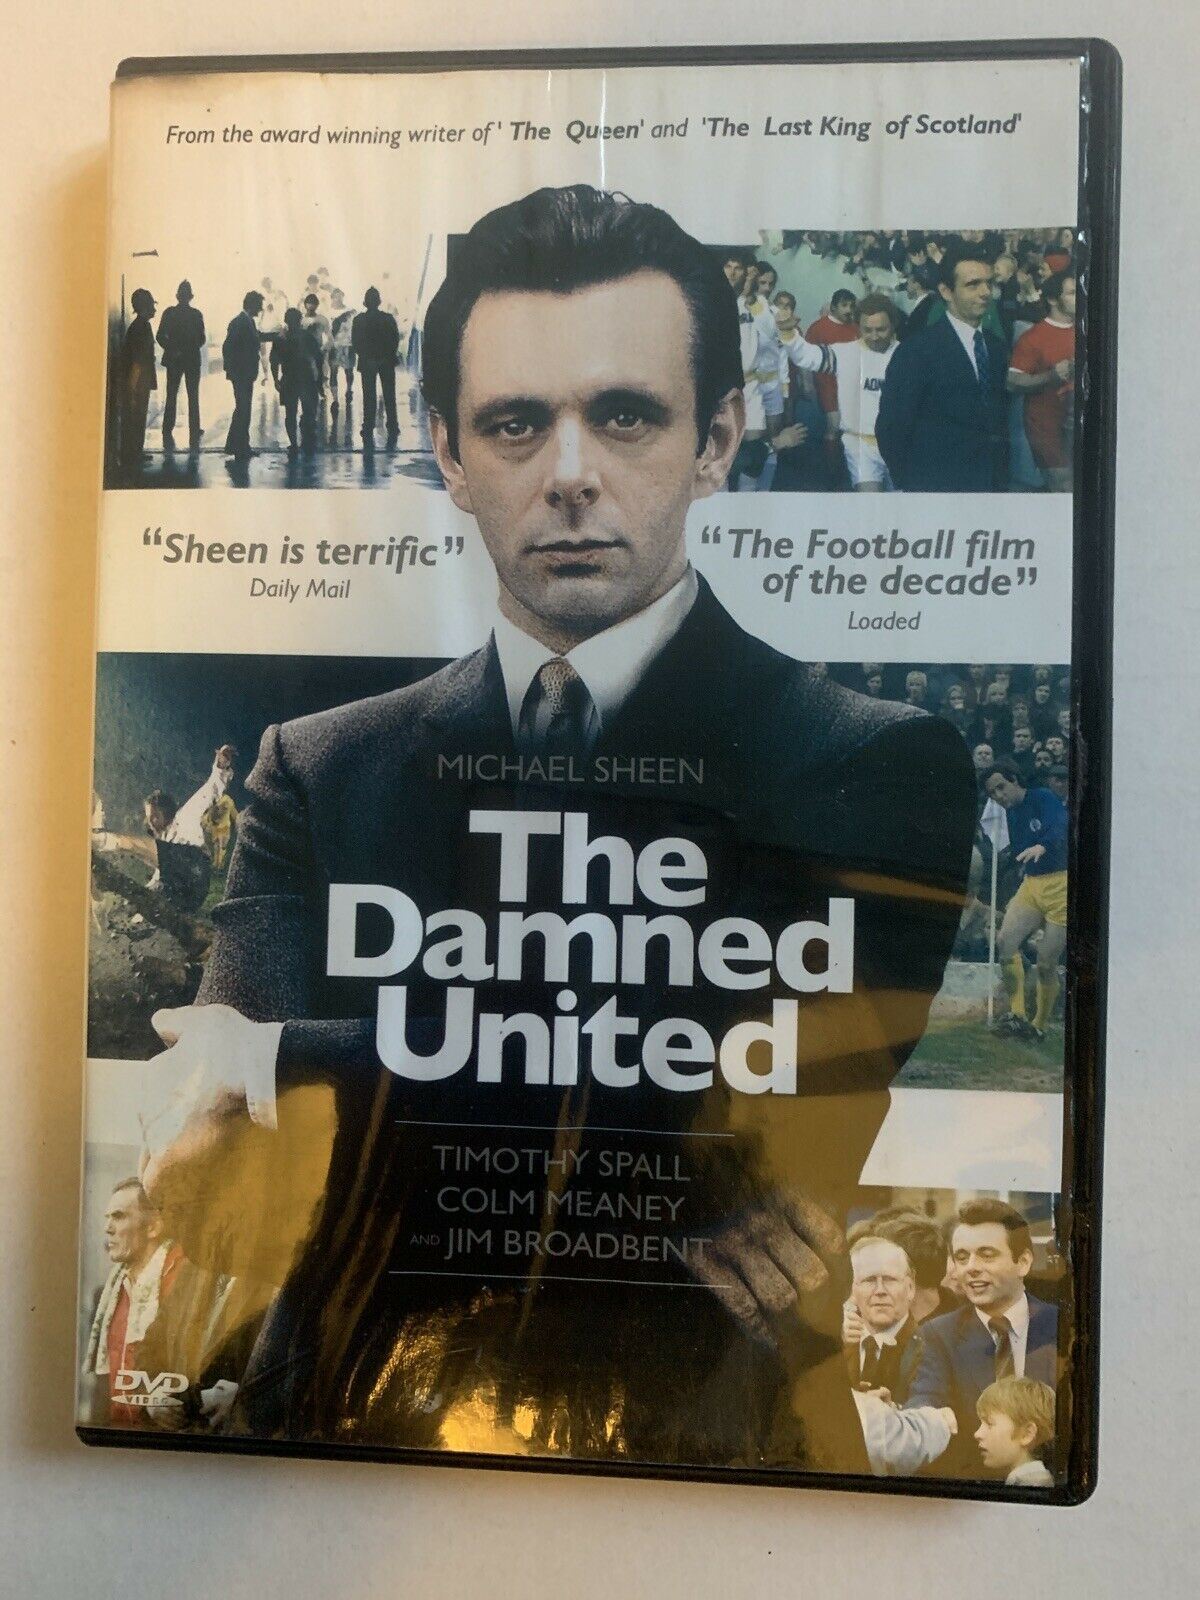 The Damned United (DVD, 2009) Timothy Spall, Colm Meaney. Region 1